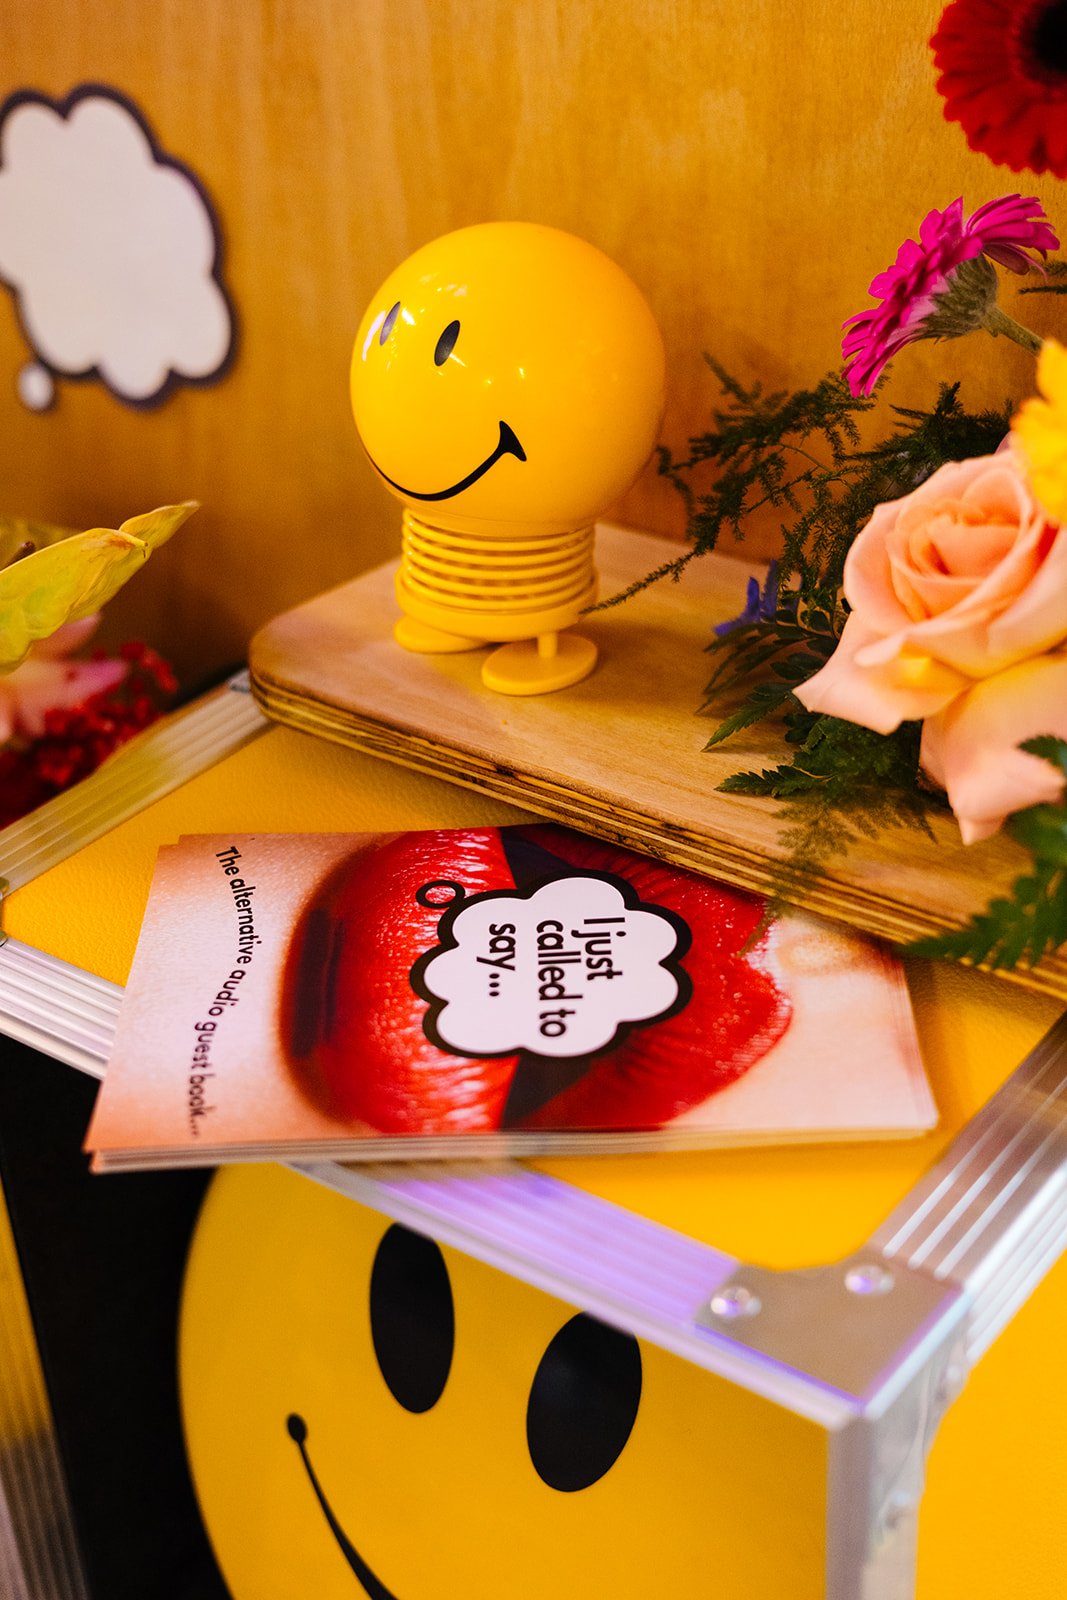  A close up of some cute details at The Un-Wedding Show Sheffield. There are some flowers, a smiley face toy and some flyers with big red lips that say ‘I just called to say… 